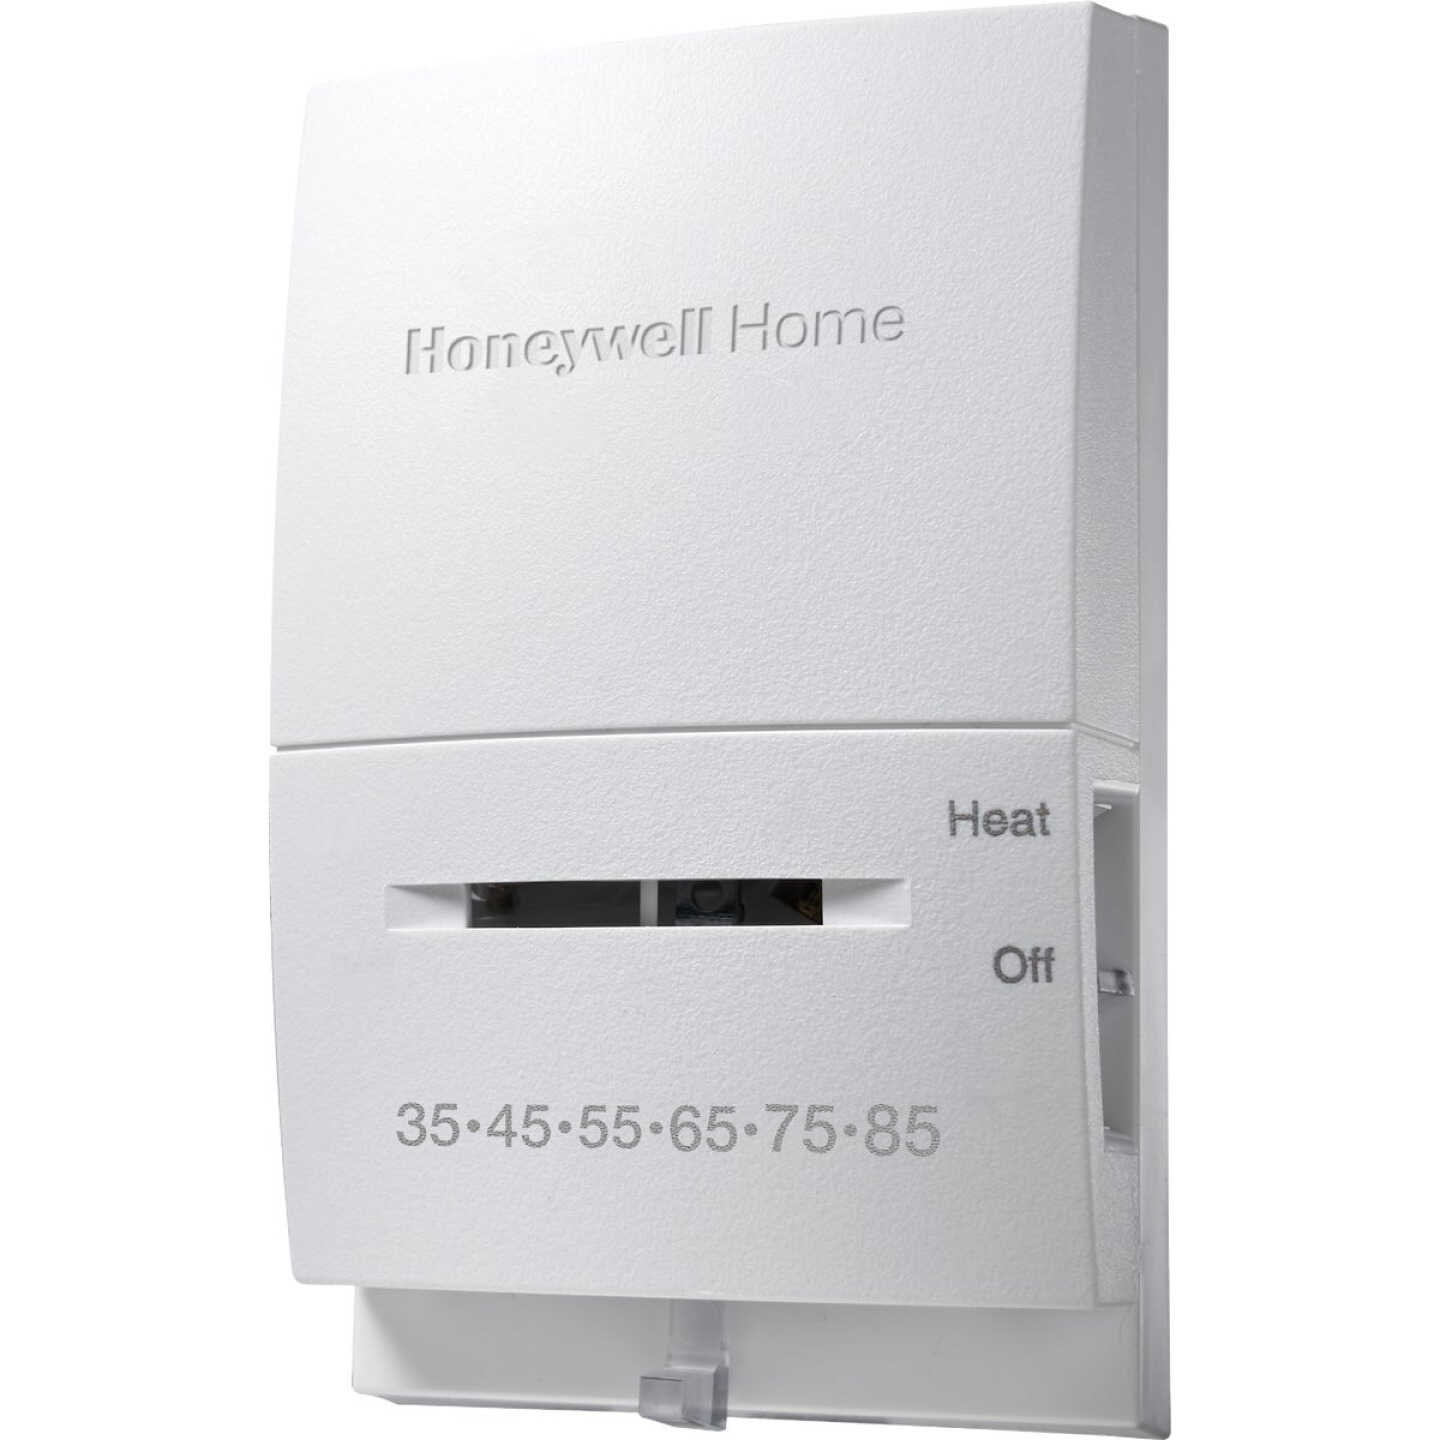 Thermosthat ambiance Honeywell Simple 2 fils